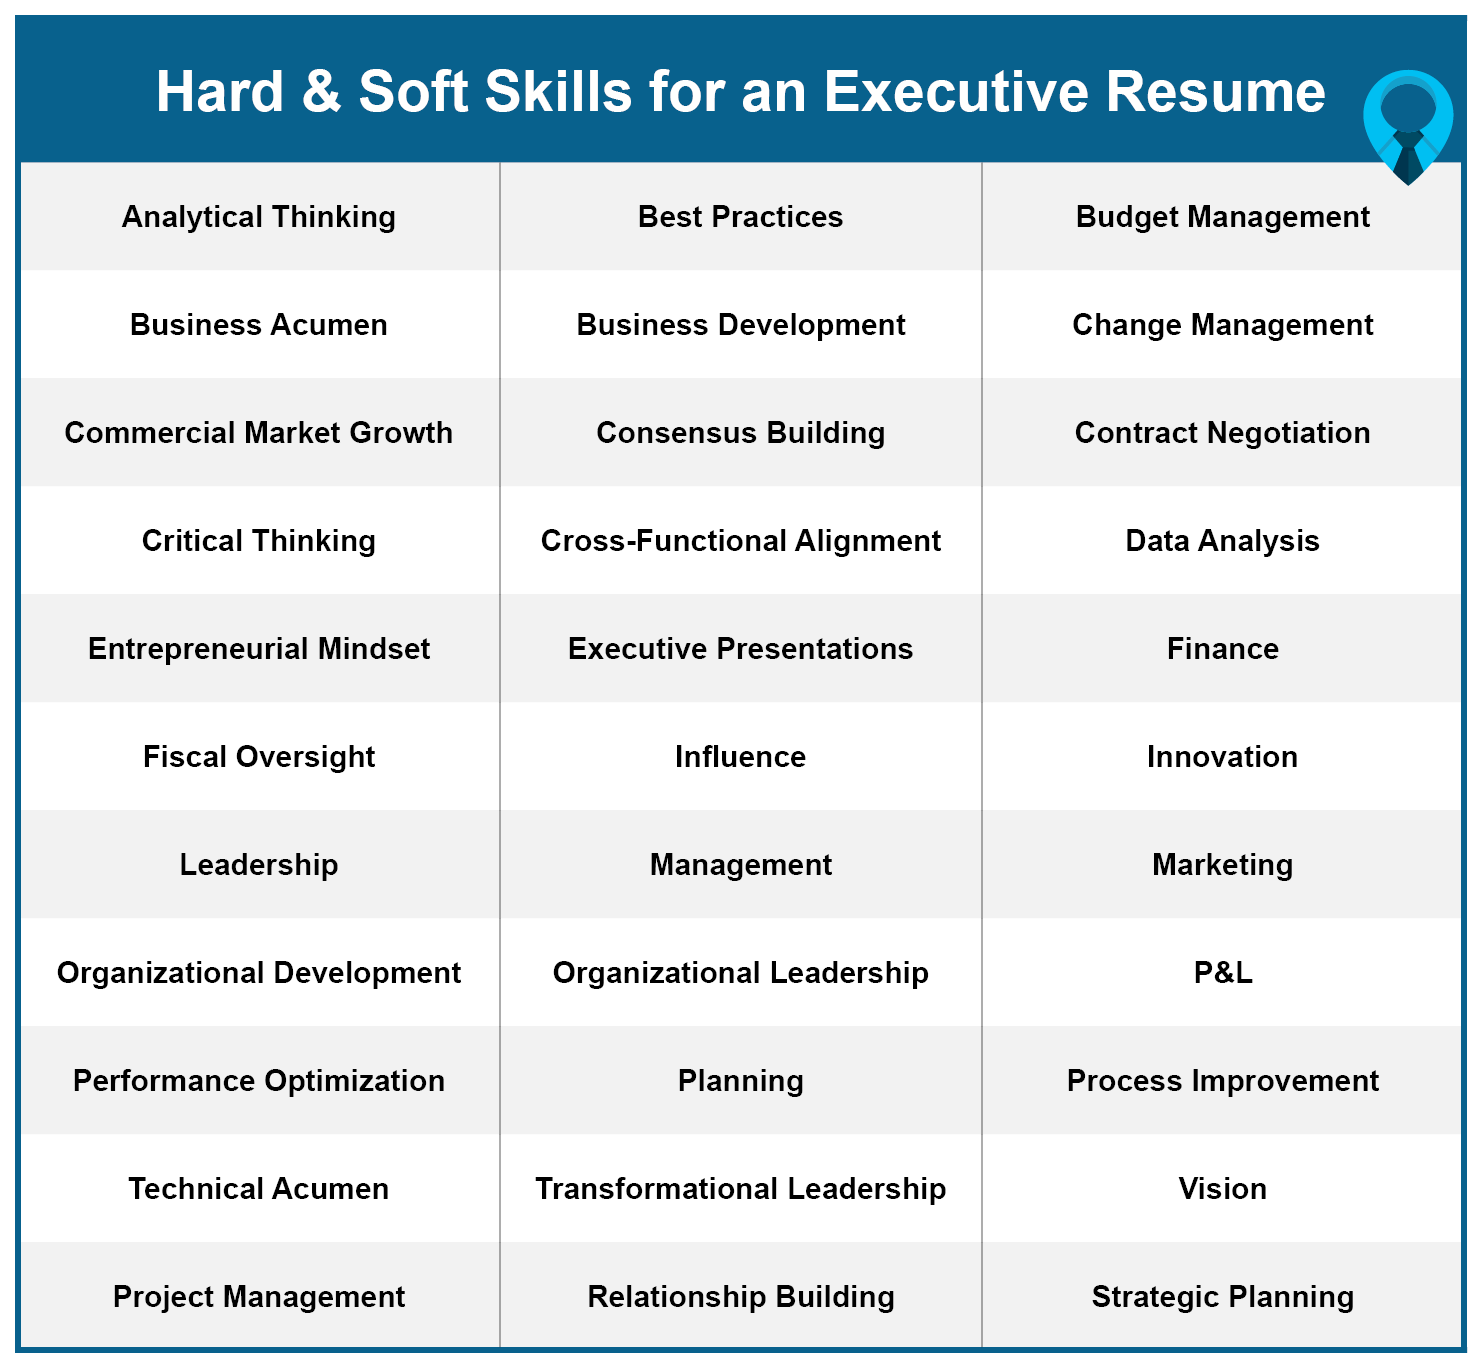 Hard and Soft Skills for Executive Resume